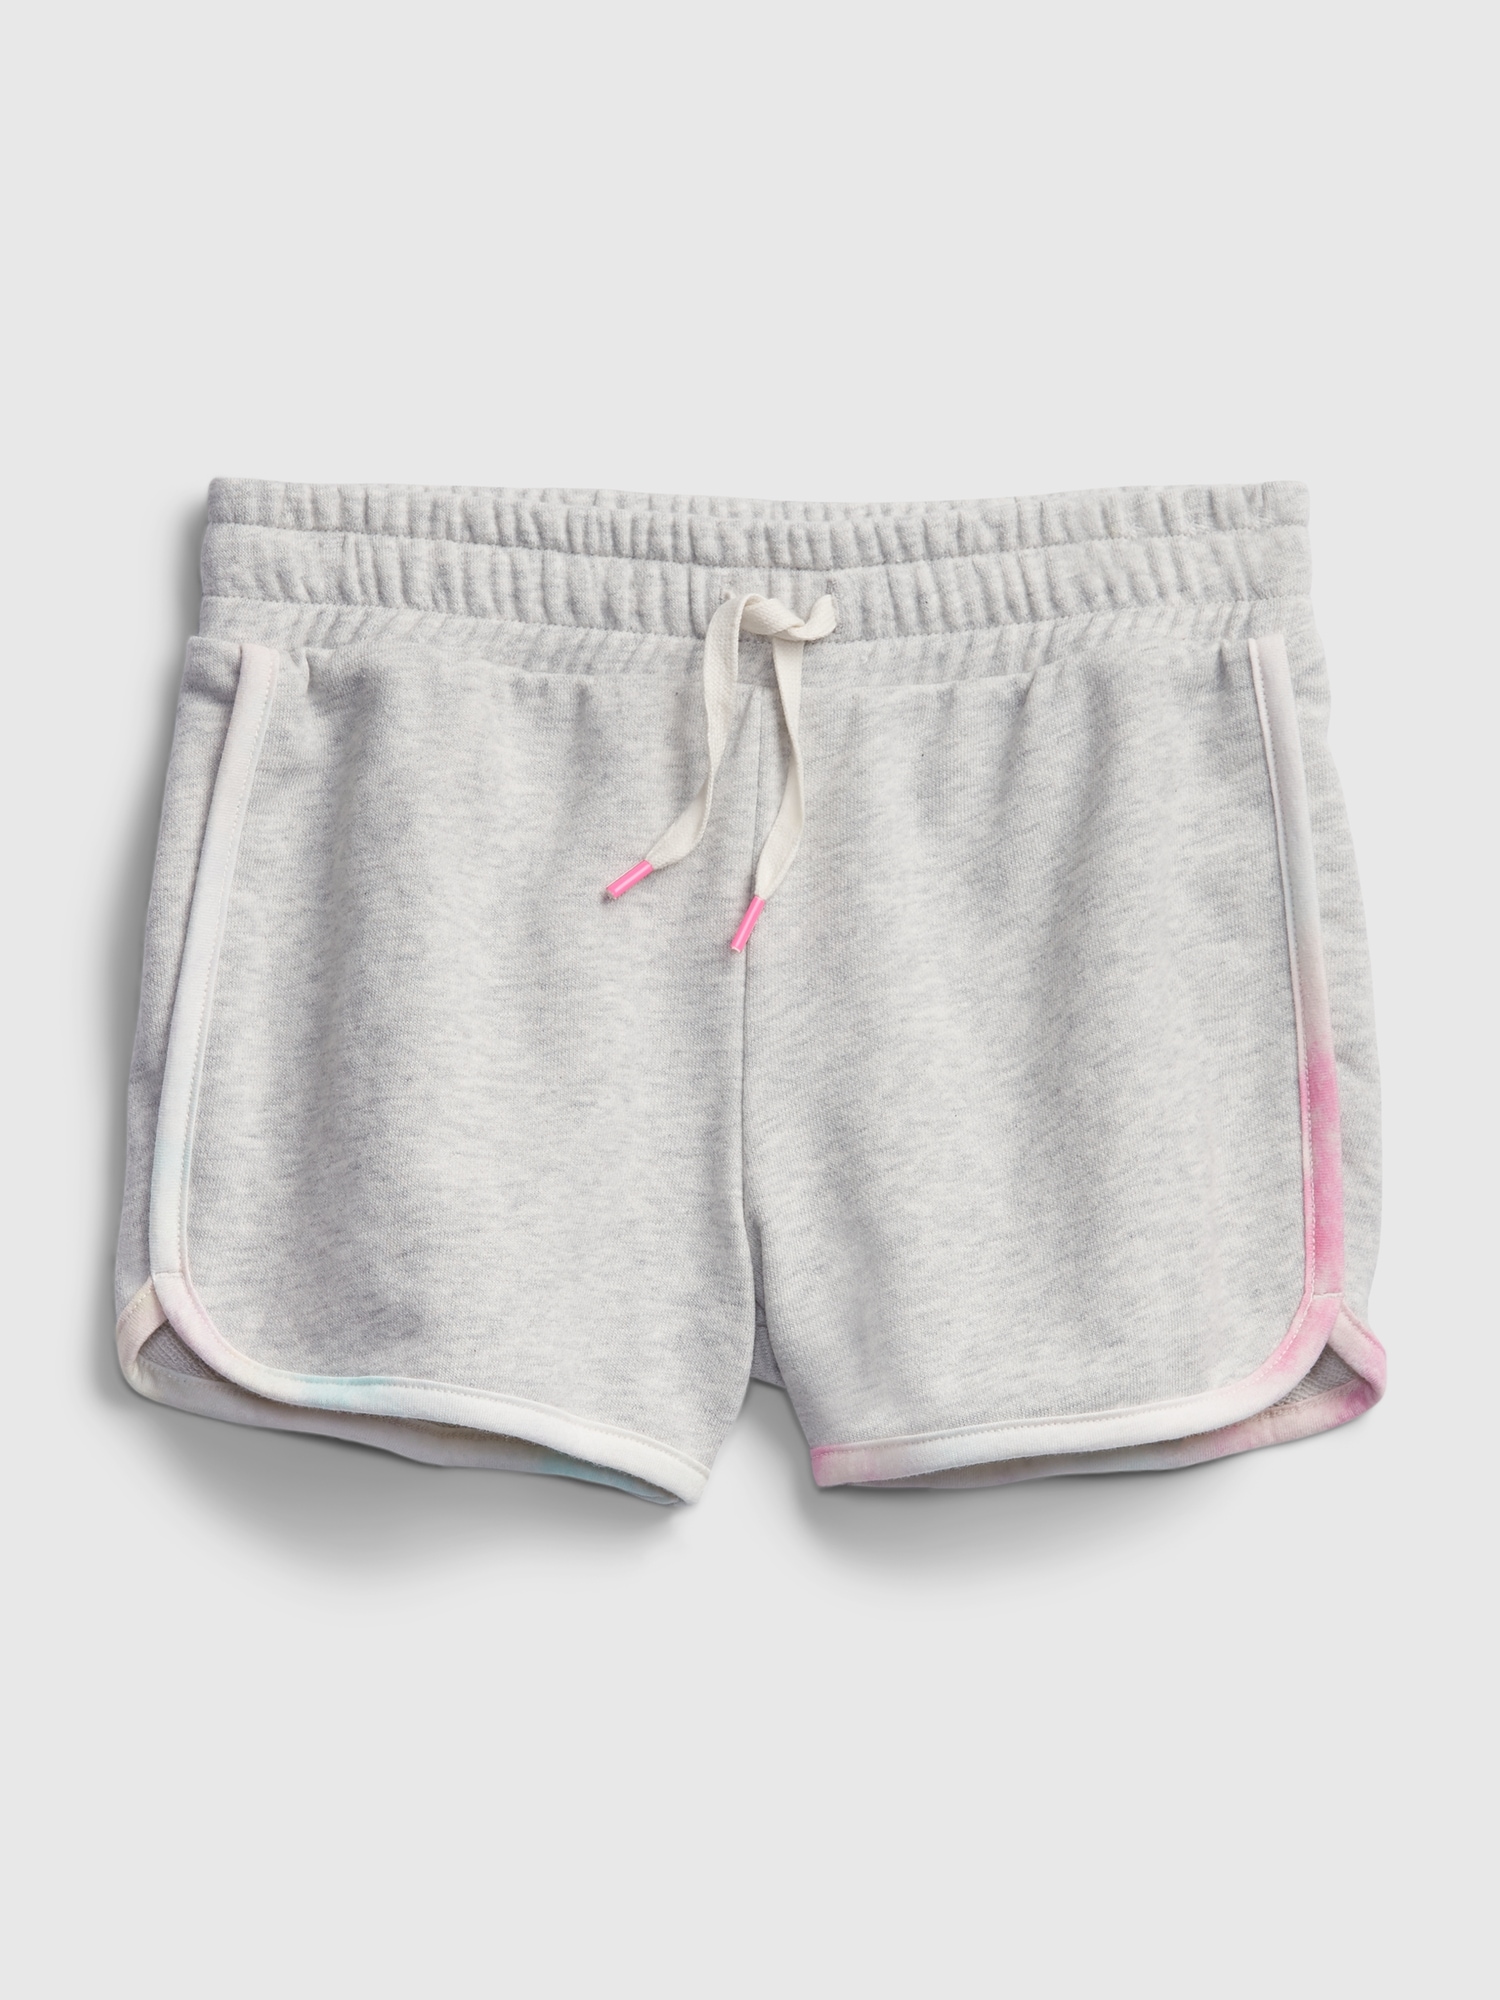 Kids Pull-On Dolphin Shorts